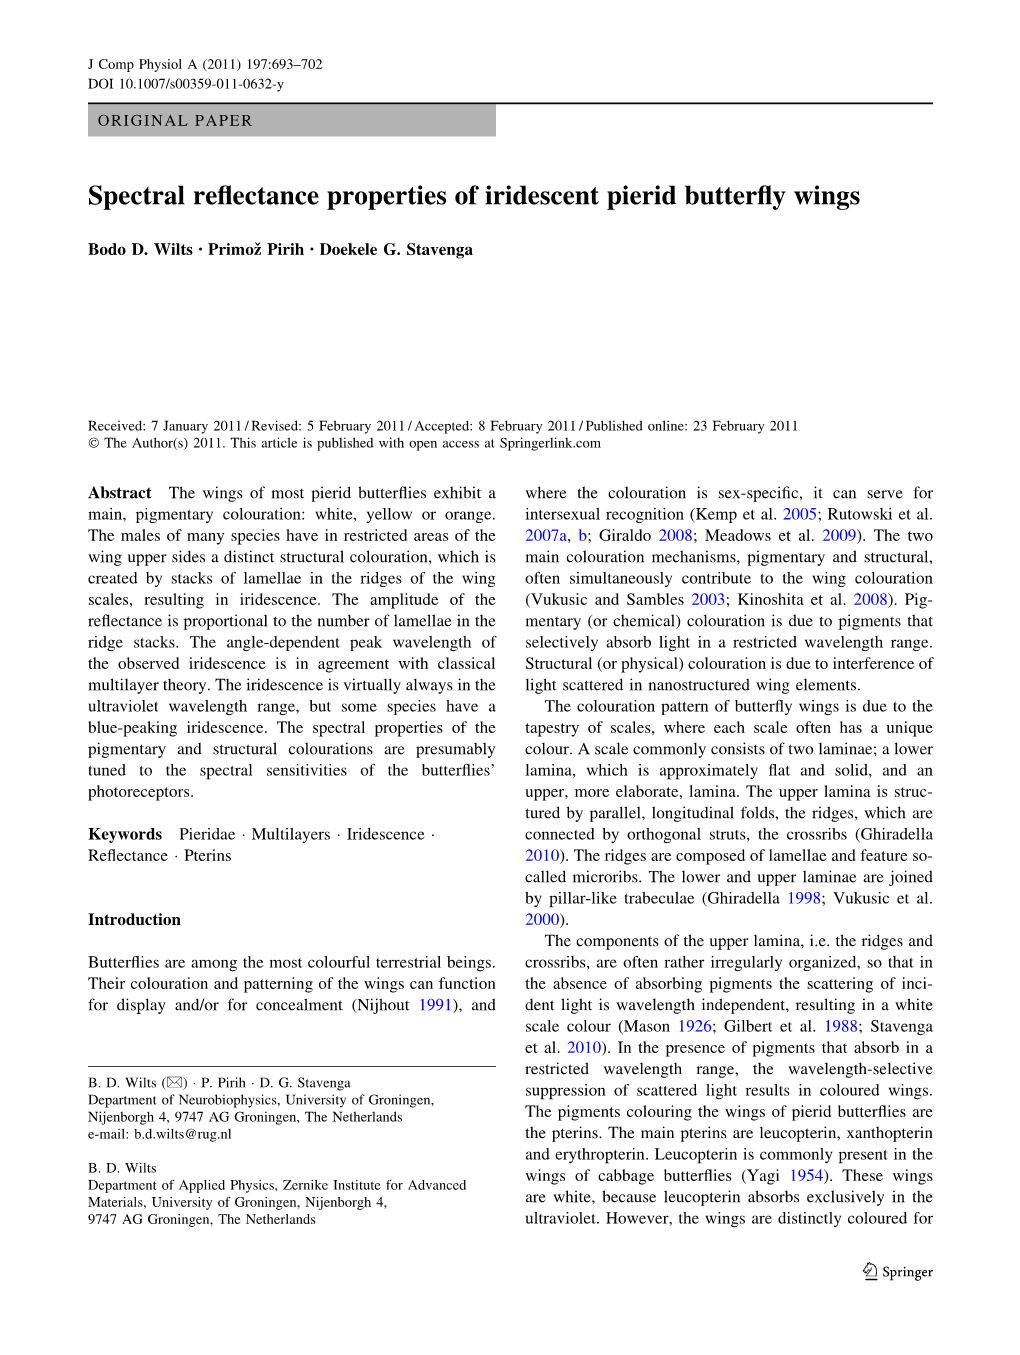 Spectral Reflectance Properties of Iridescent Pierid Butterfly Wings